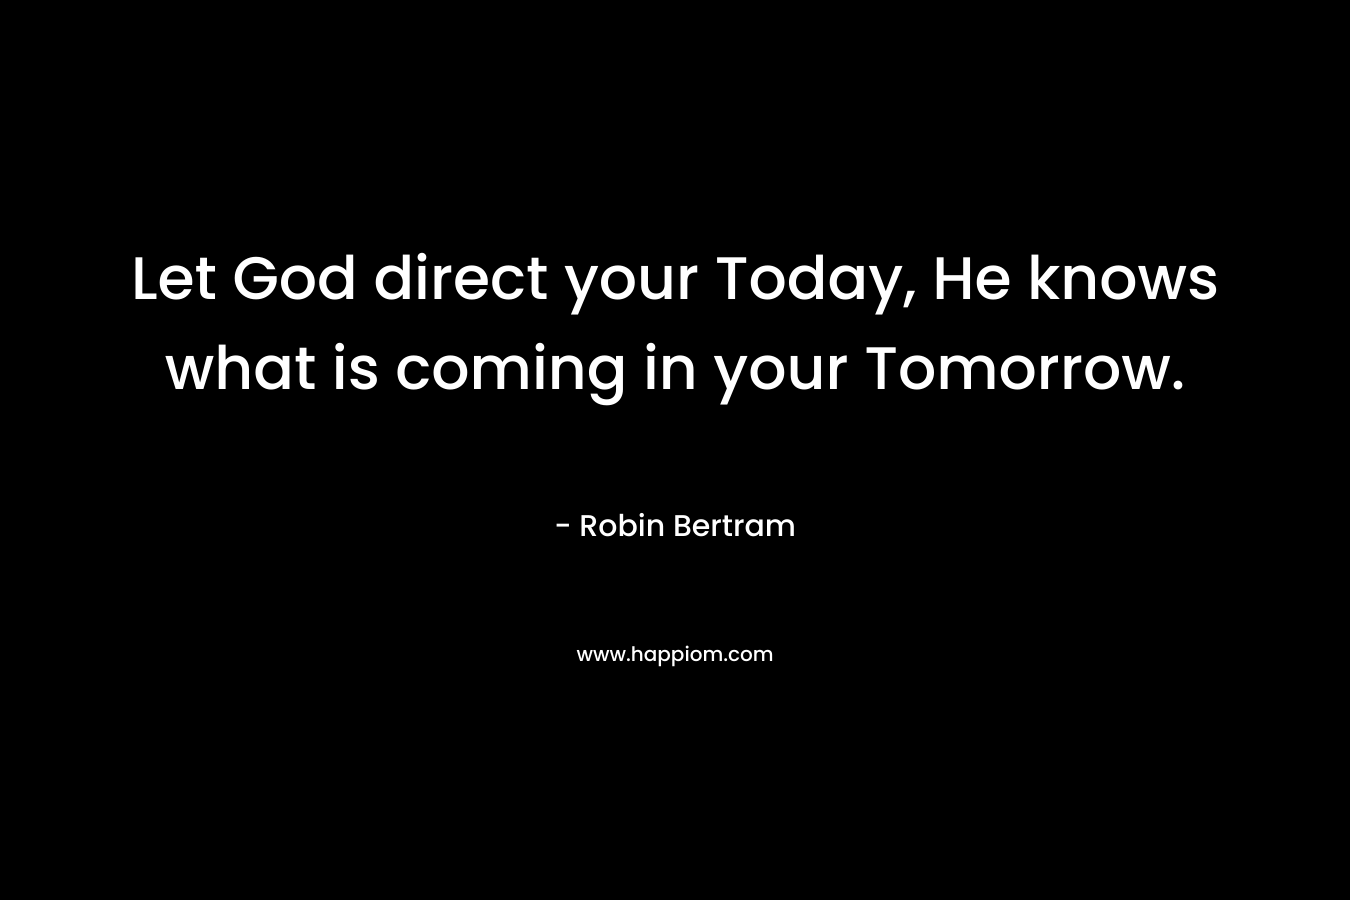 Let God direct your Today, He knows what is coming in your Tomorrow.